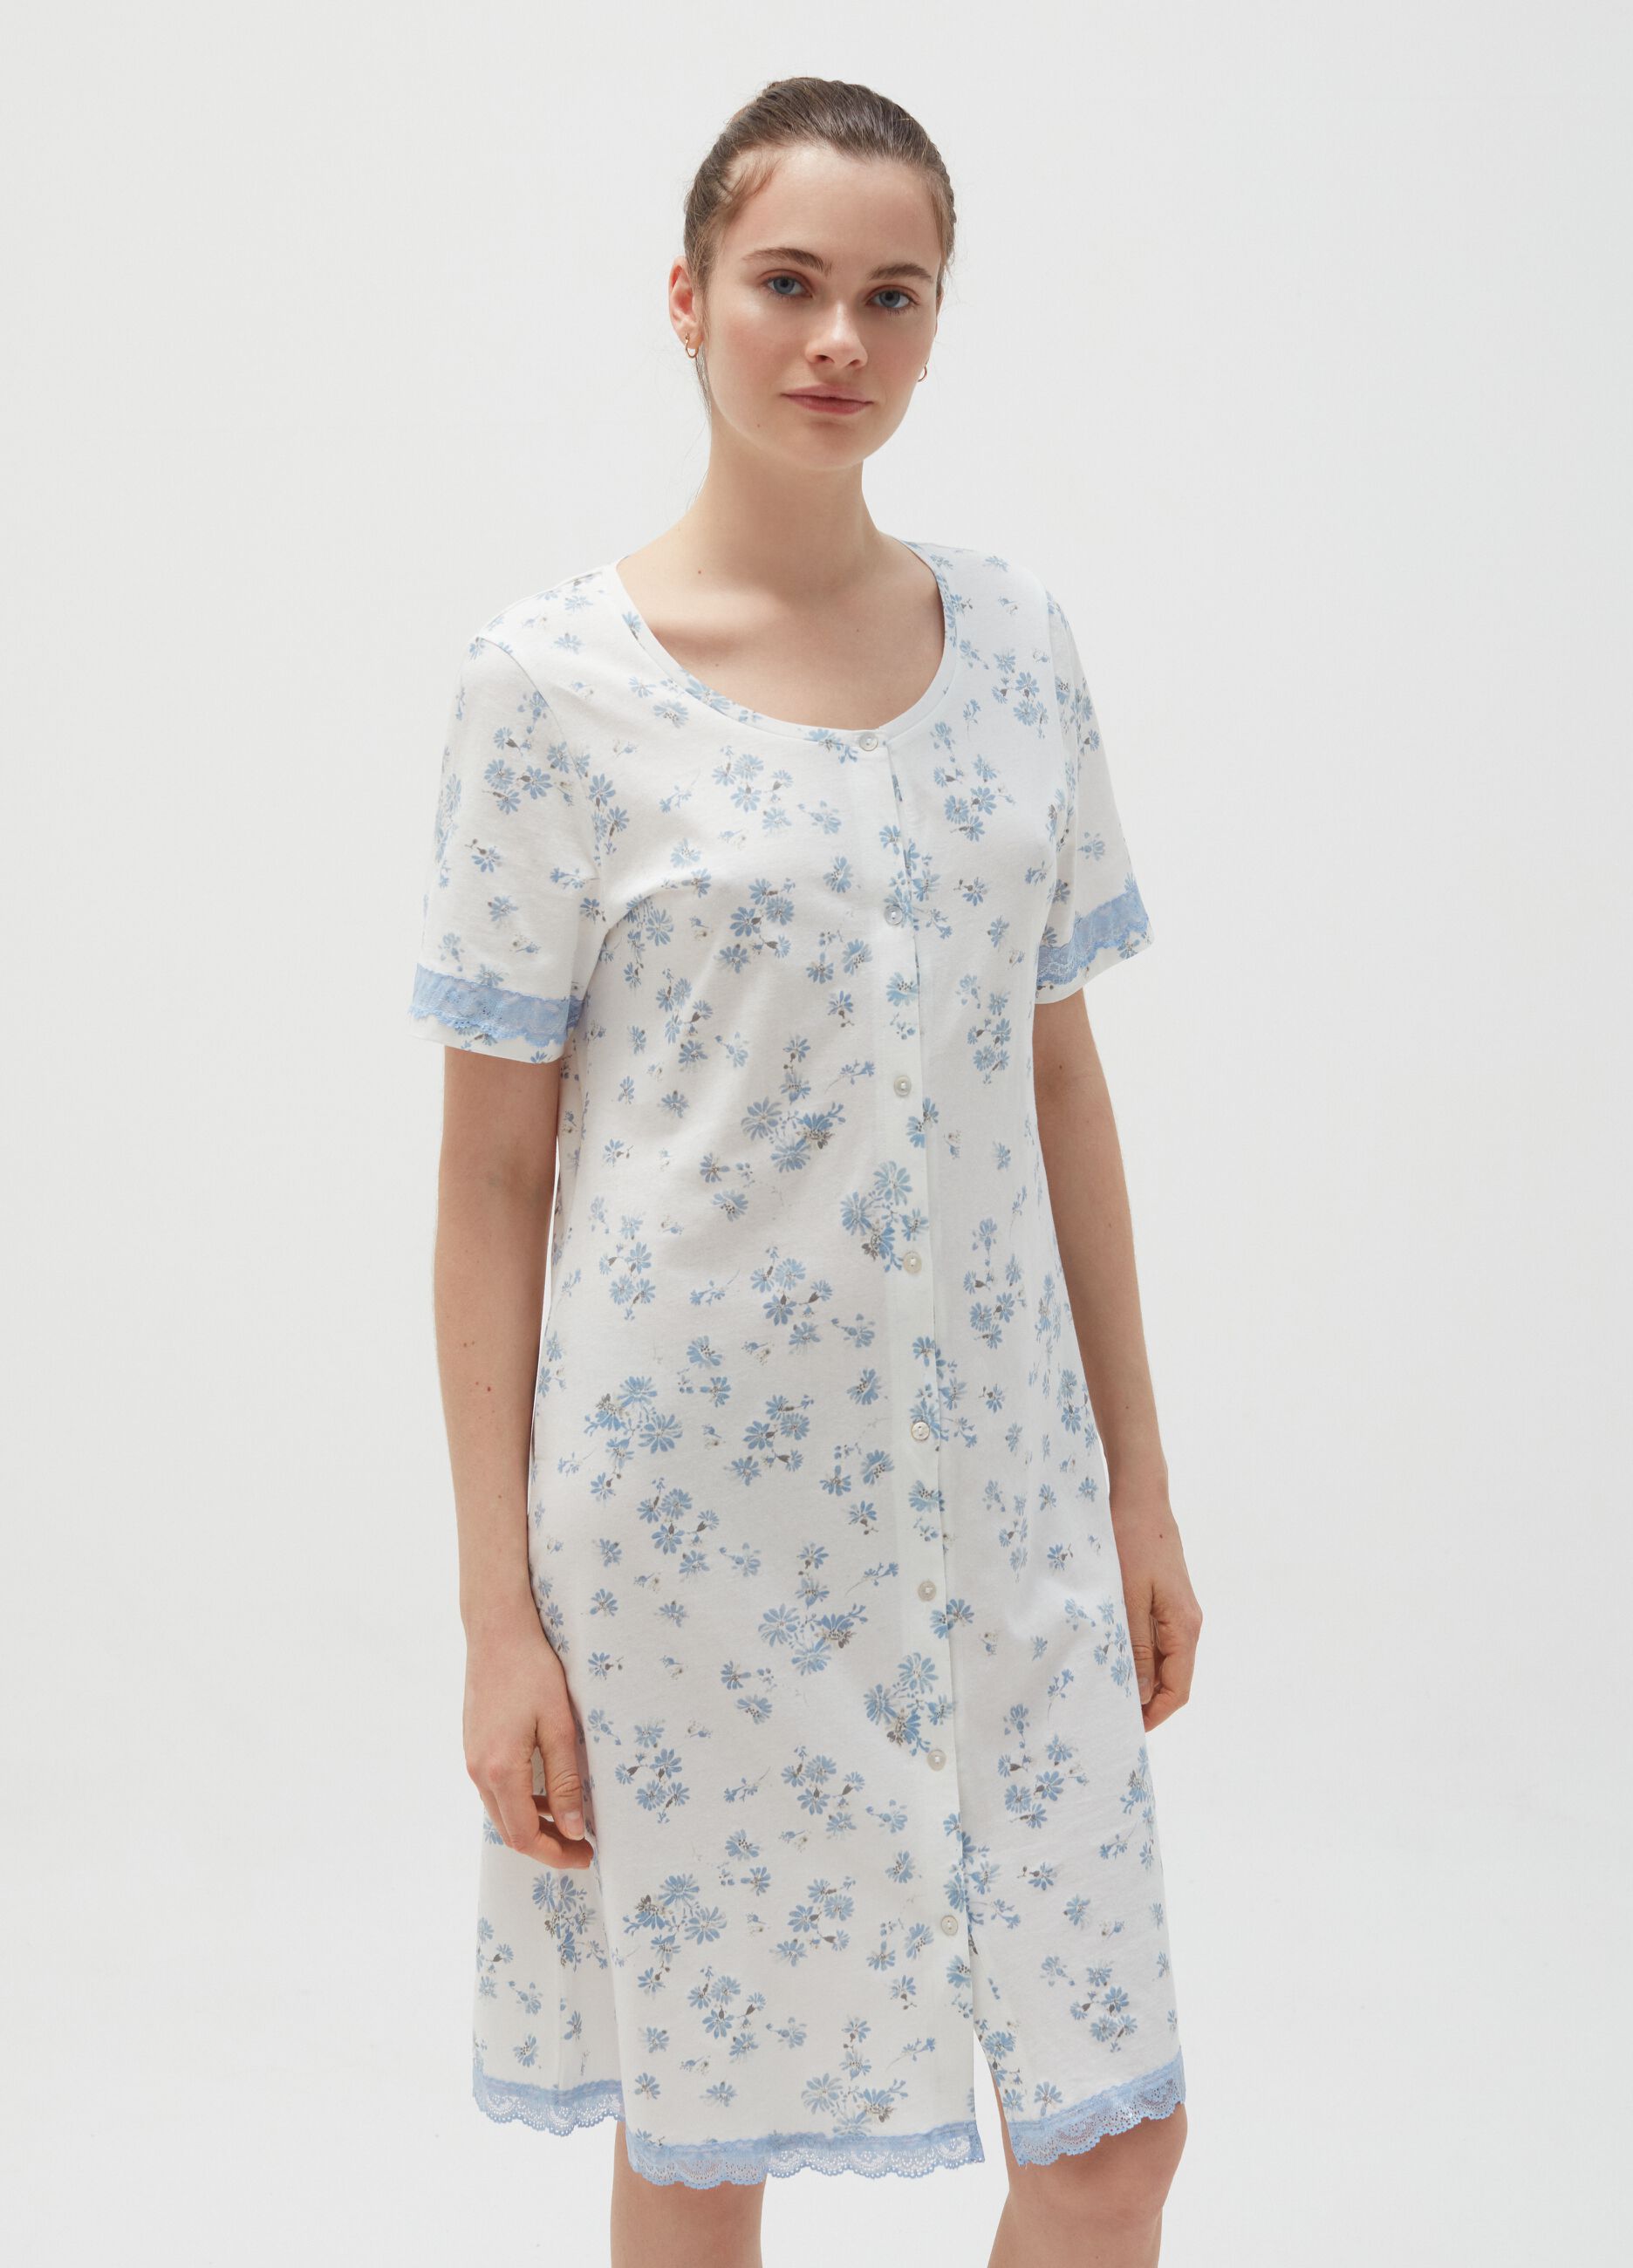 Cotton nightdress with floral pattern